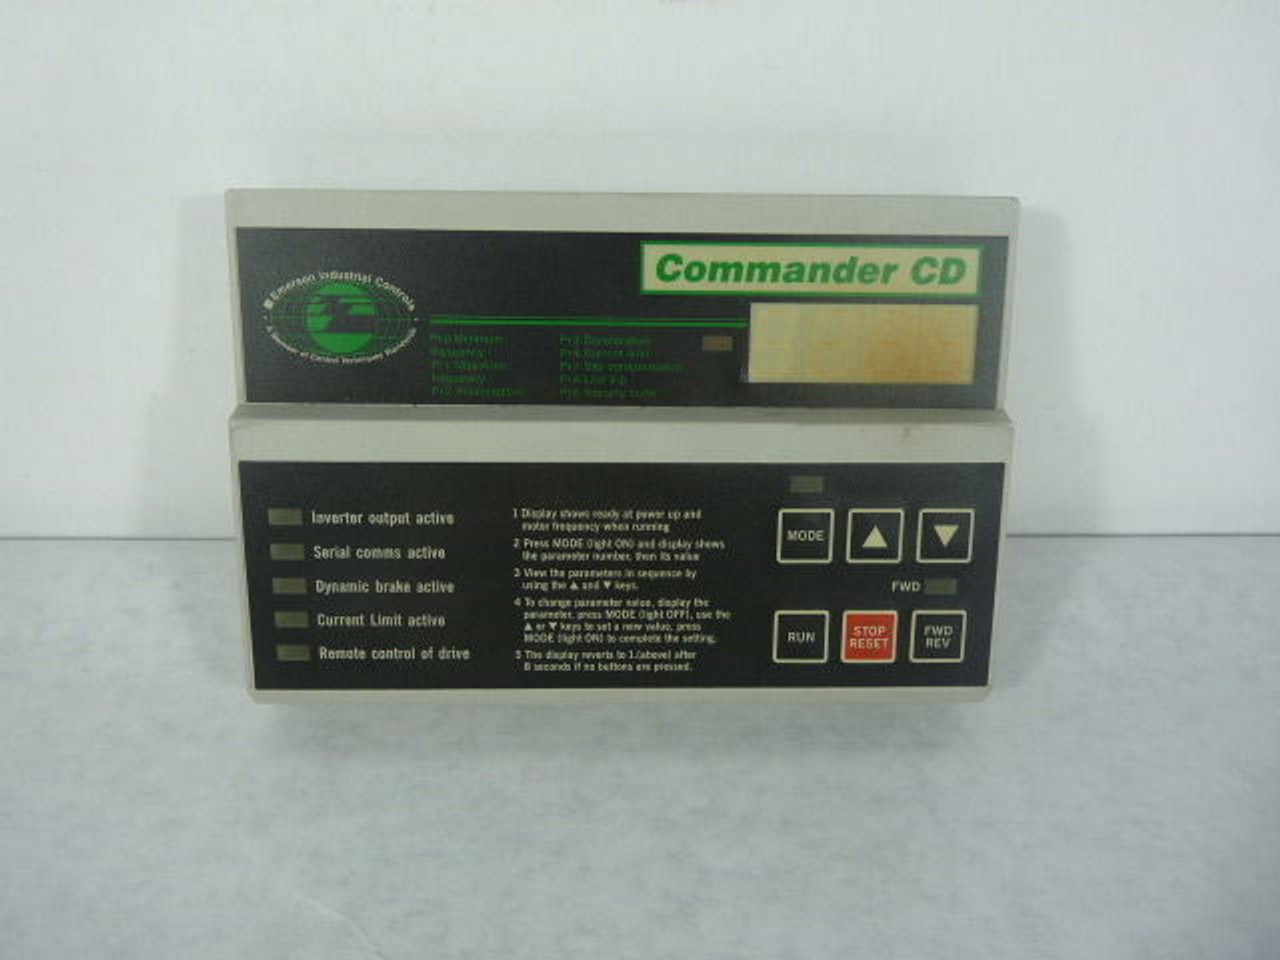 Emerson DCN 92598 Commander CD Control Panel With Display USED